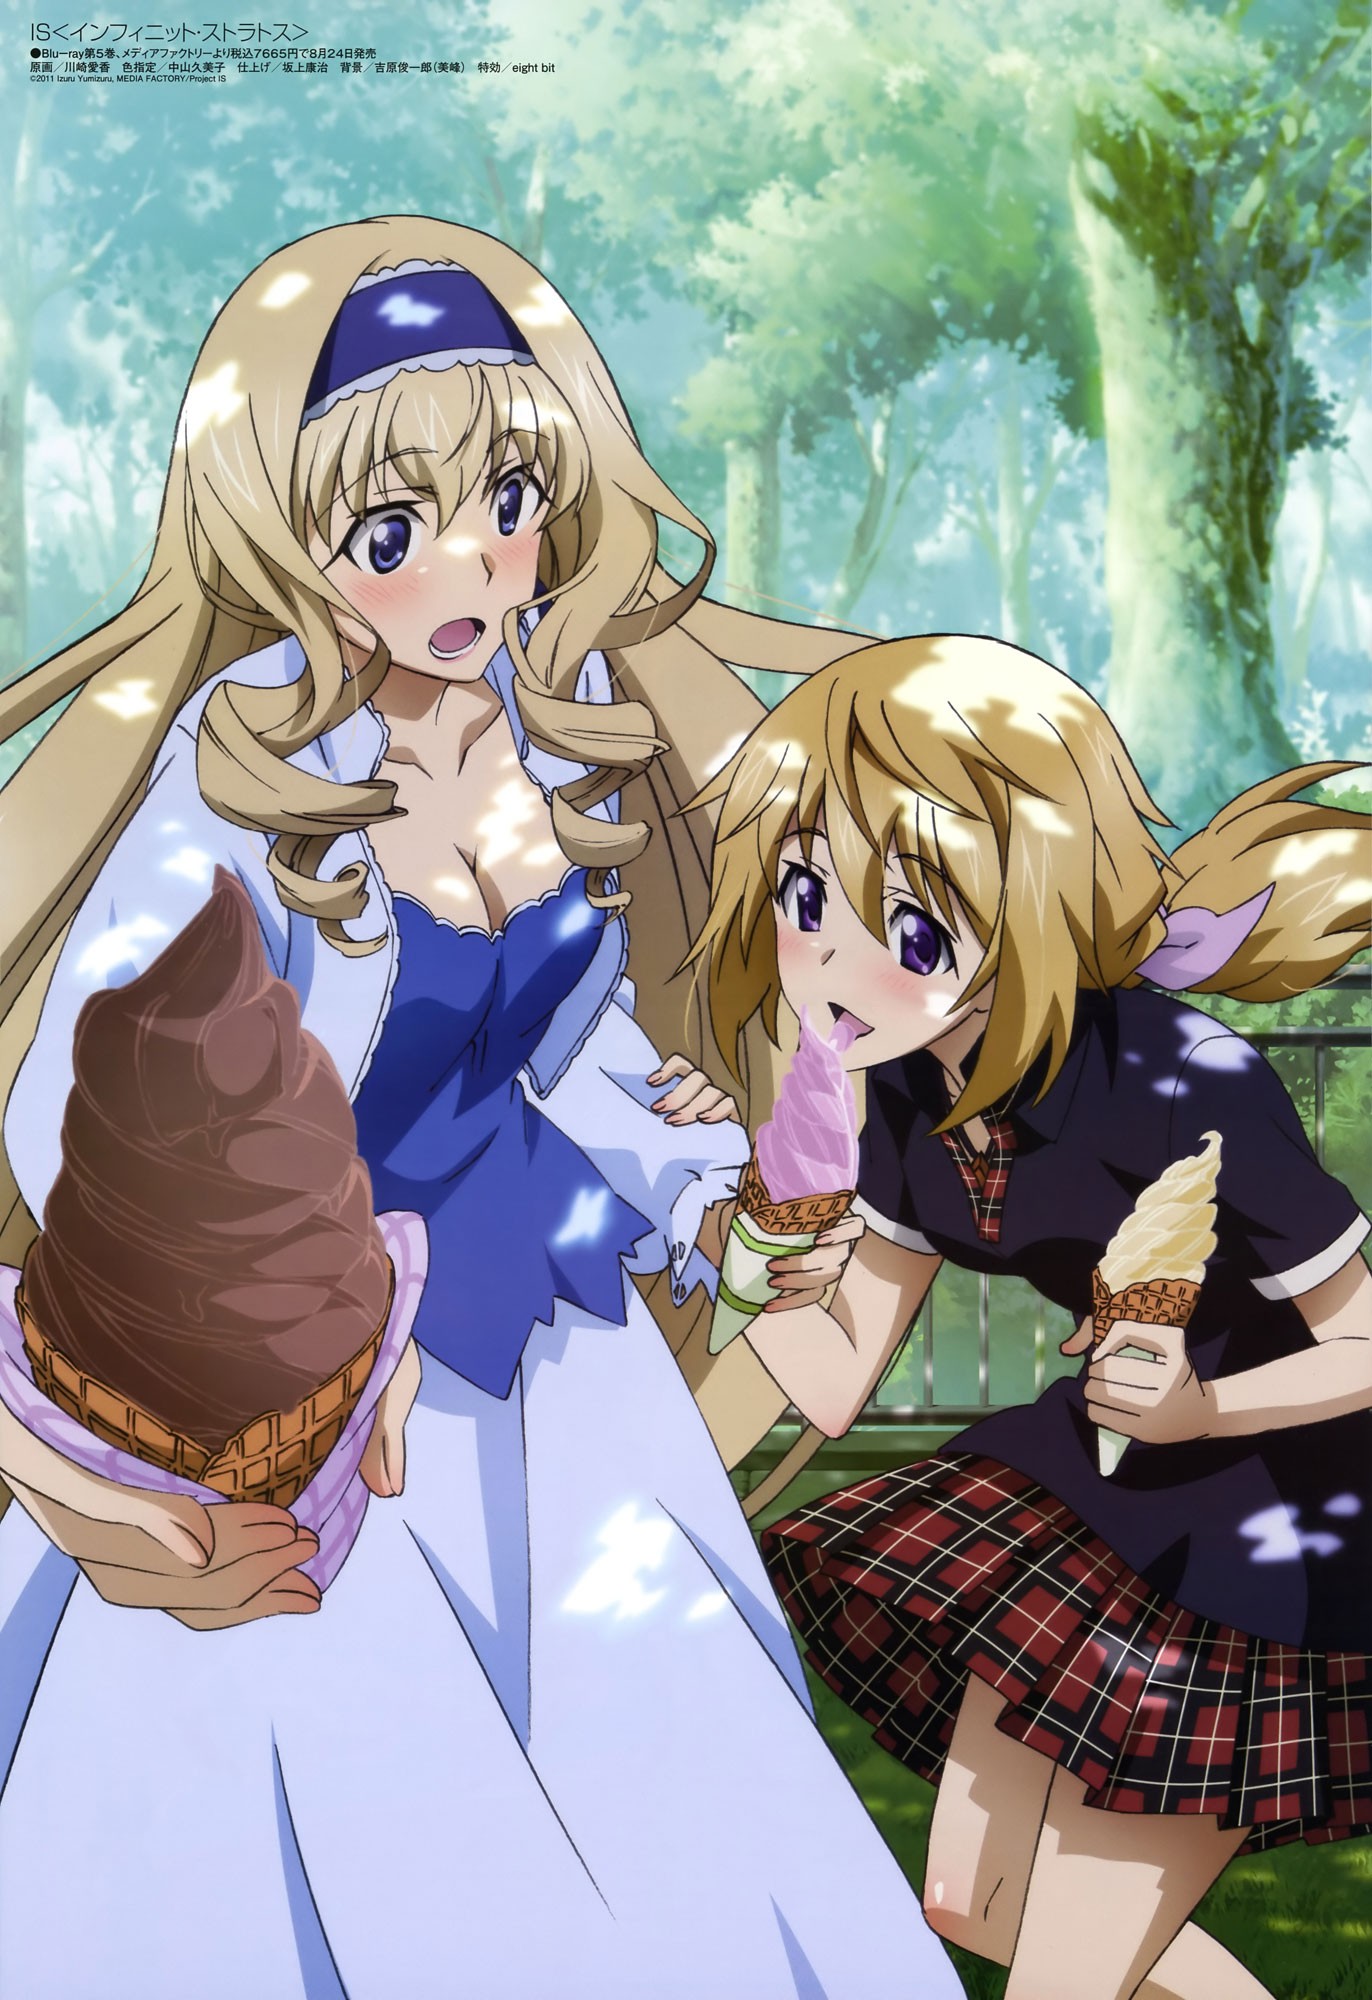 Anime 1372x2000 anime anime girls Dunois Charlotte Alcot Cecilia Infinite Stratos two women boobs cleavage dress food sweets ice cream licking blonde hairband plaid skirt women outdoors anime girls eating long hair